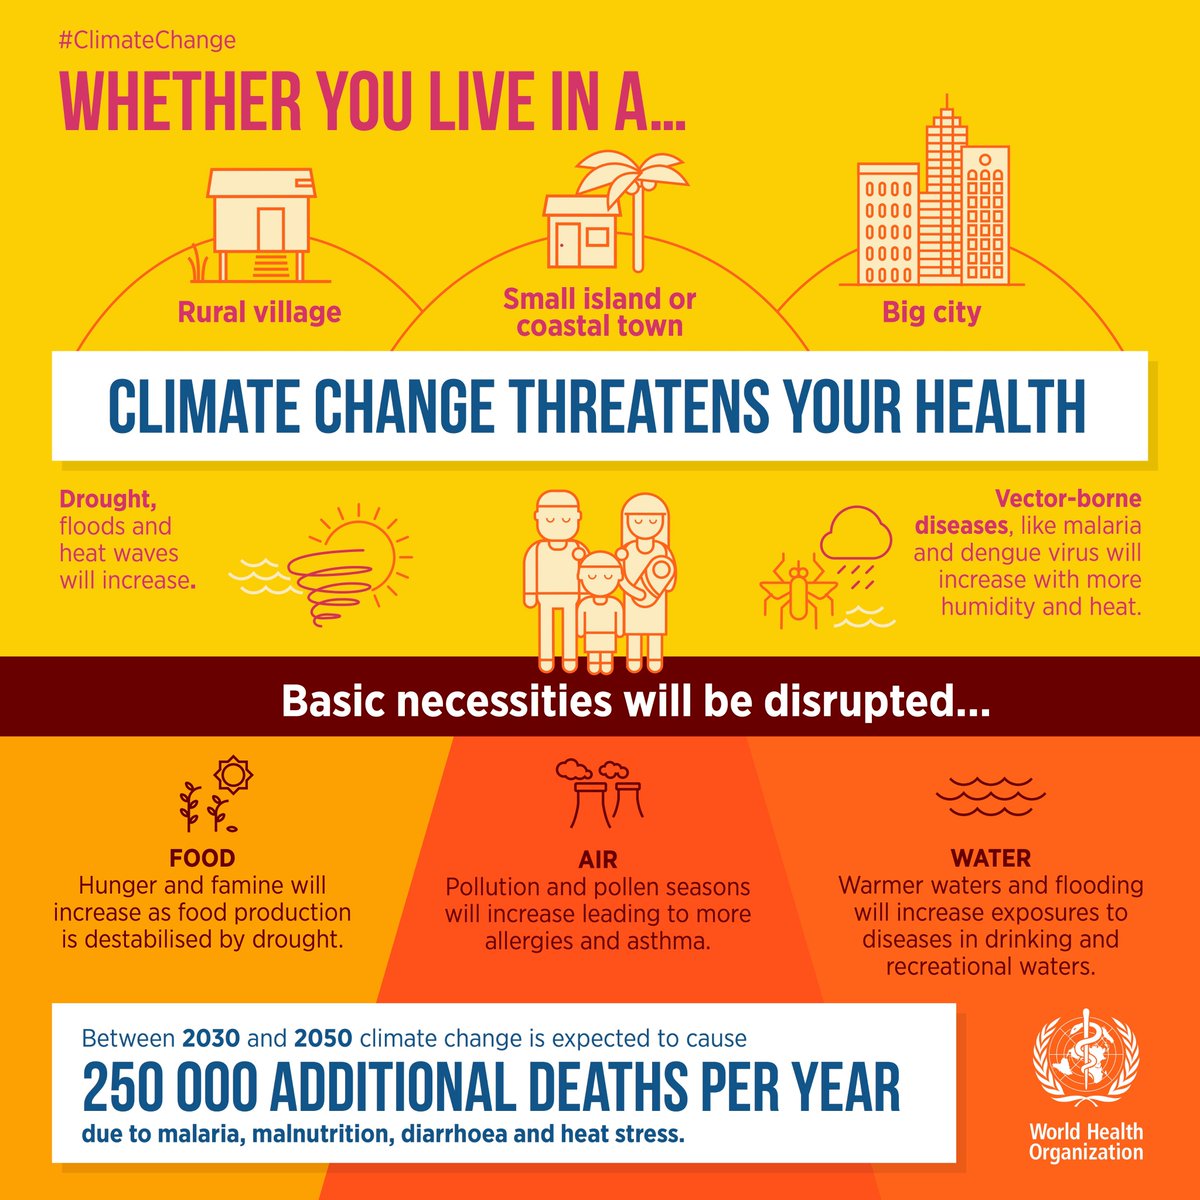 #ClimateChange expected to add +250 000 deaths per yr btw 2030-50 #HealthAndClimate goo.gl/BZFJu1